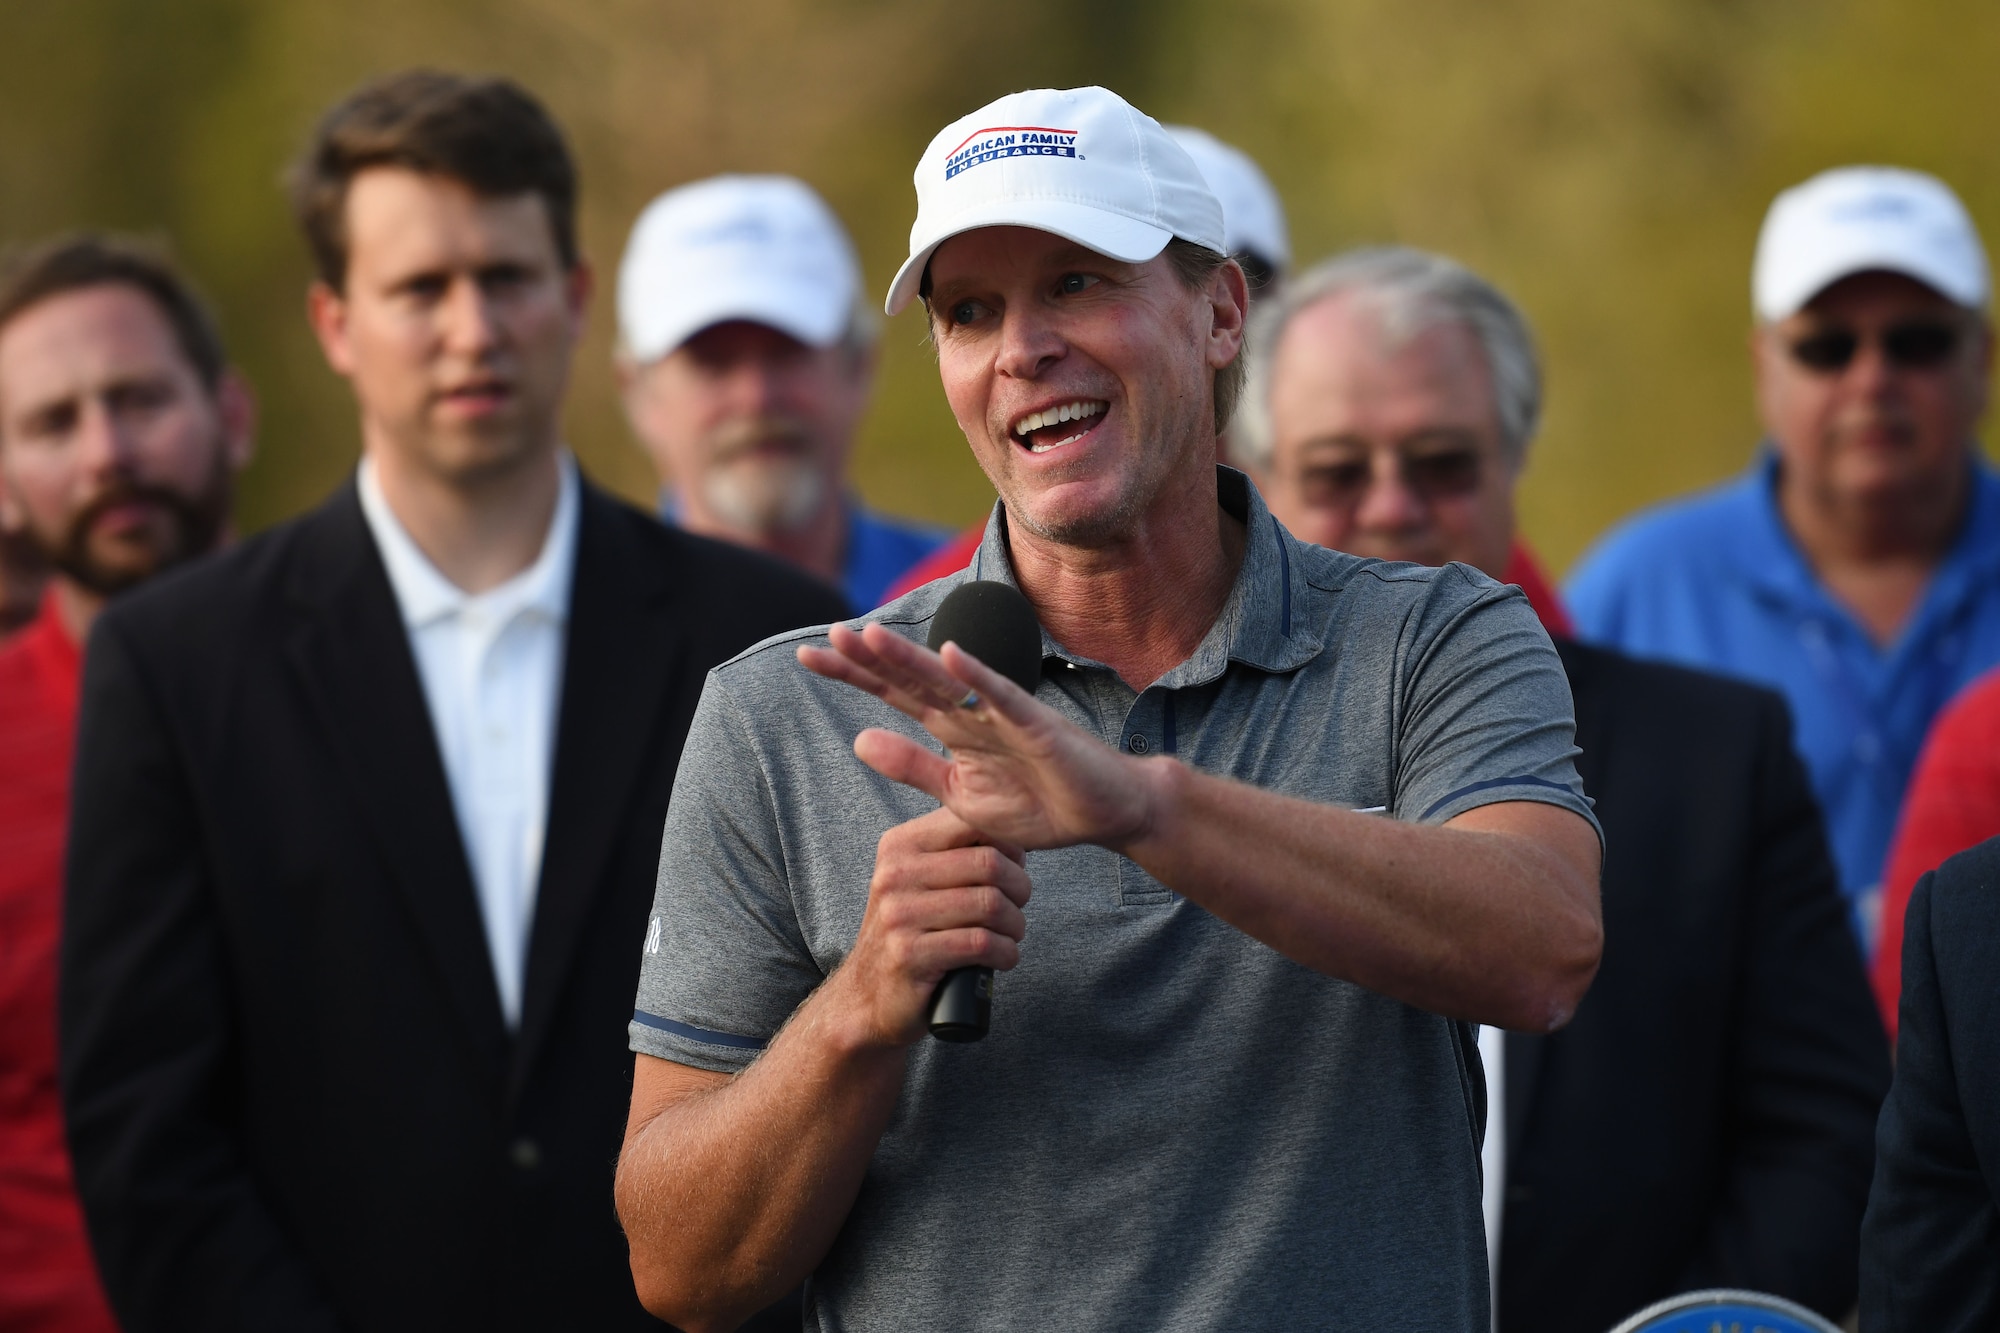 Steve Stricker, Professional Golfers’ Association golfer, delivers remarks after winning the Rapiscan Systems Classic Champions Tour at Fallen Oak Golf Club March 25, 2018, in Saucier, Mississippi. Keesler personnel performed the national anthem and presented the colors during the closing ceremony of the three-day event. This is the fifth year that the event has been held on the coast. (U.S. Air Force photo by Kemberly Groue)